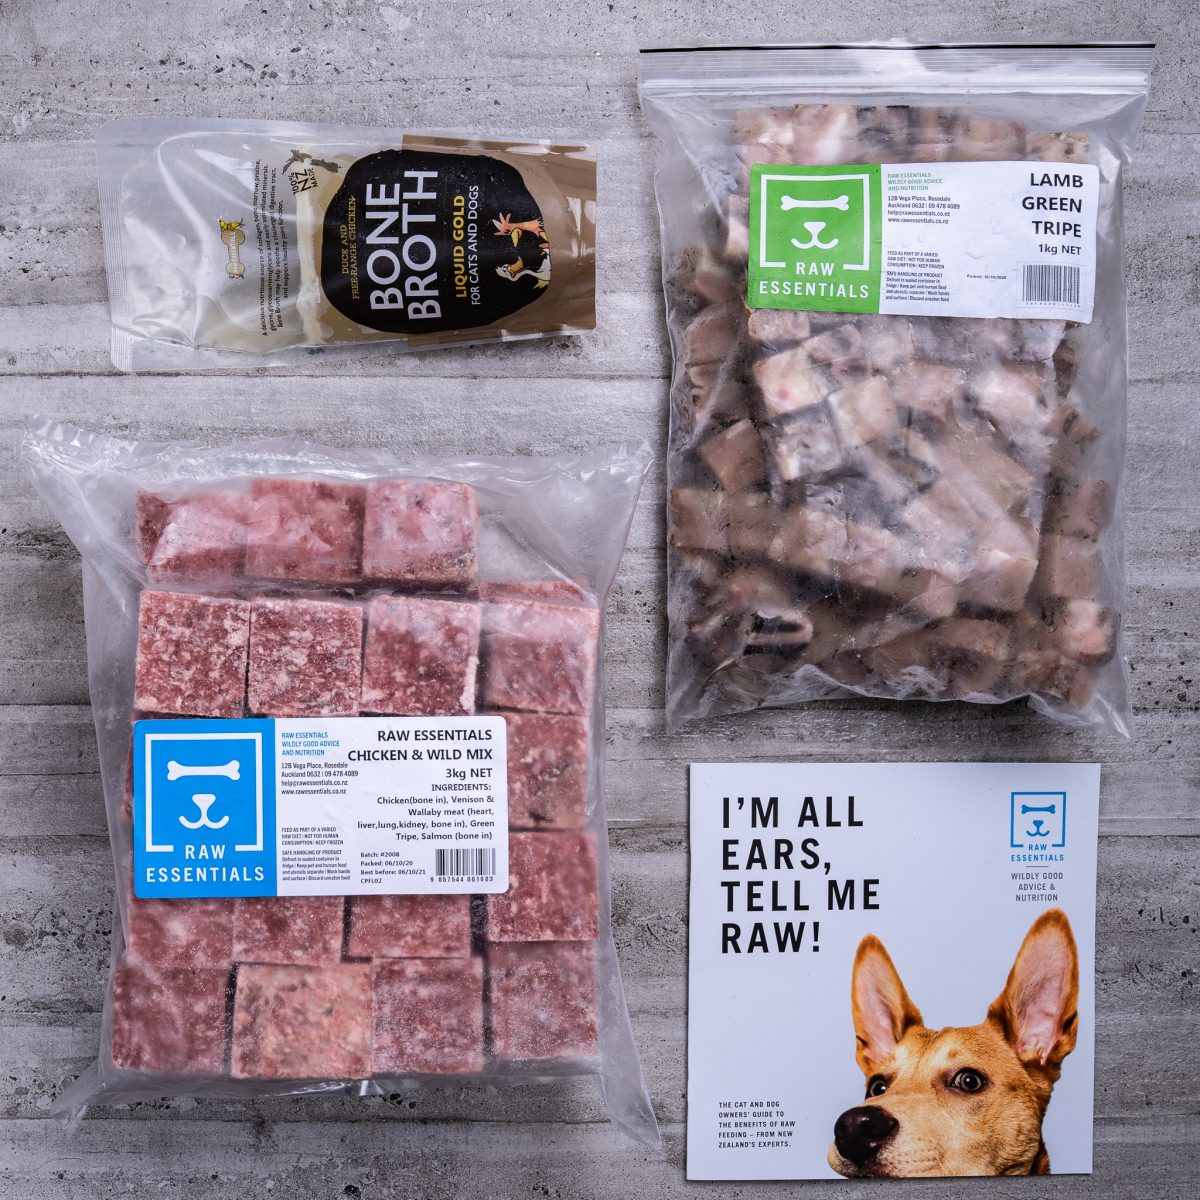 Assortment Of Raw Essential Products For Puppies Including, Bone Broth, 1KG Plastic Pack Of Small Cubed Lamb And Green Tripe Meat Mix, 3KG Plastic Pack Of Cubed Chicken And Wild Meat Mix, Raw Essentials Advice And Nutrition Pamphlet